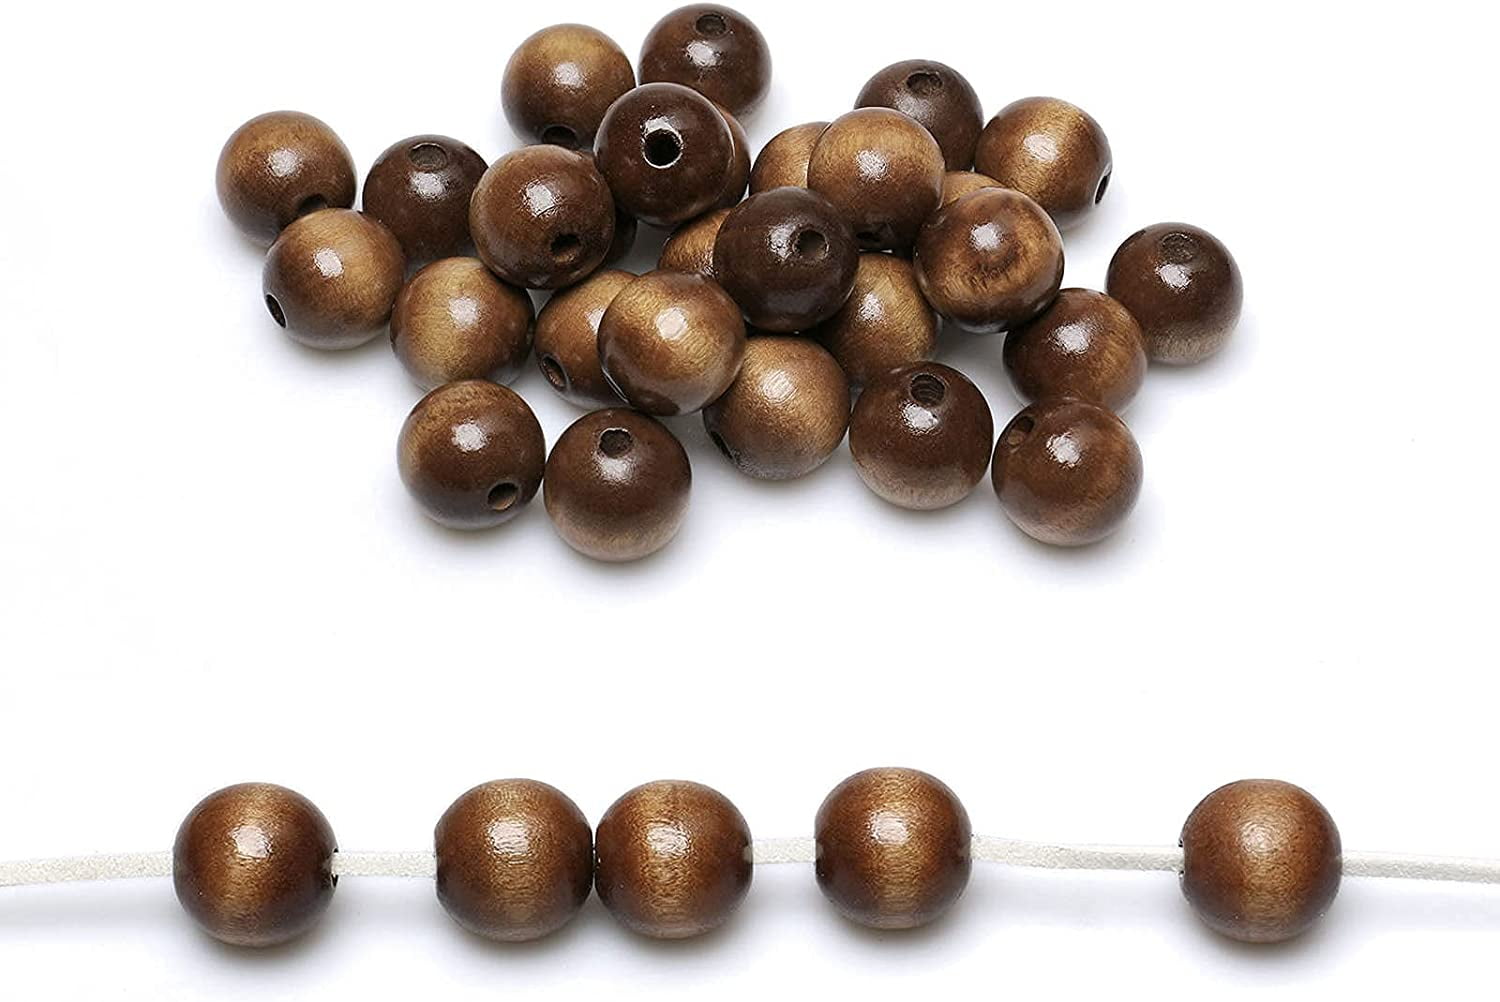 20mm Wholesale Natural Wood Beads Clips at CraftySticks